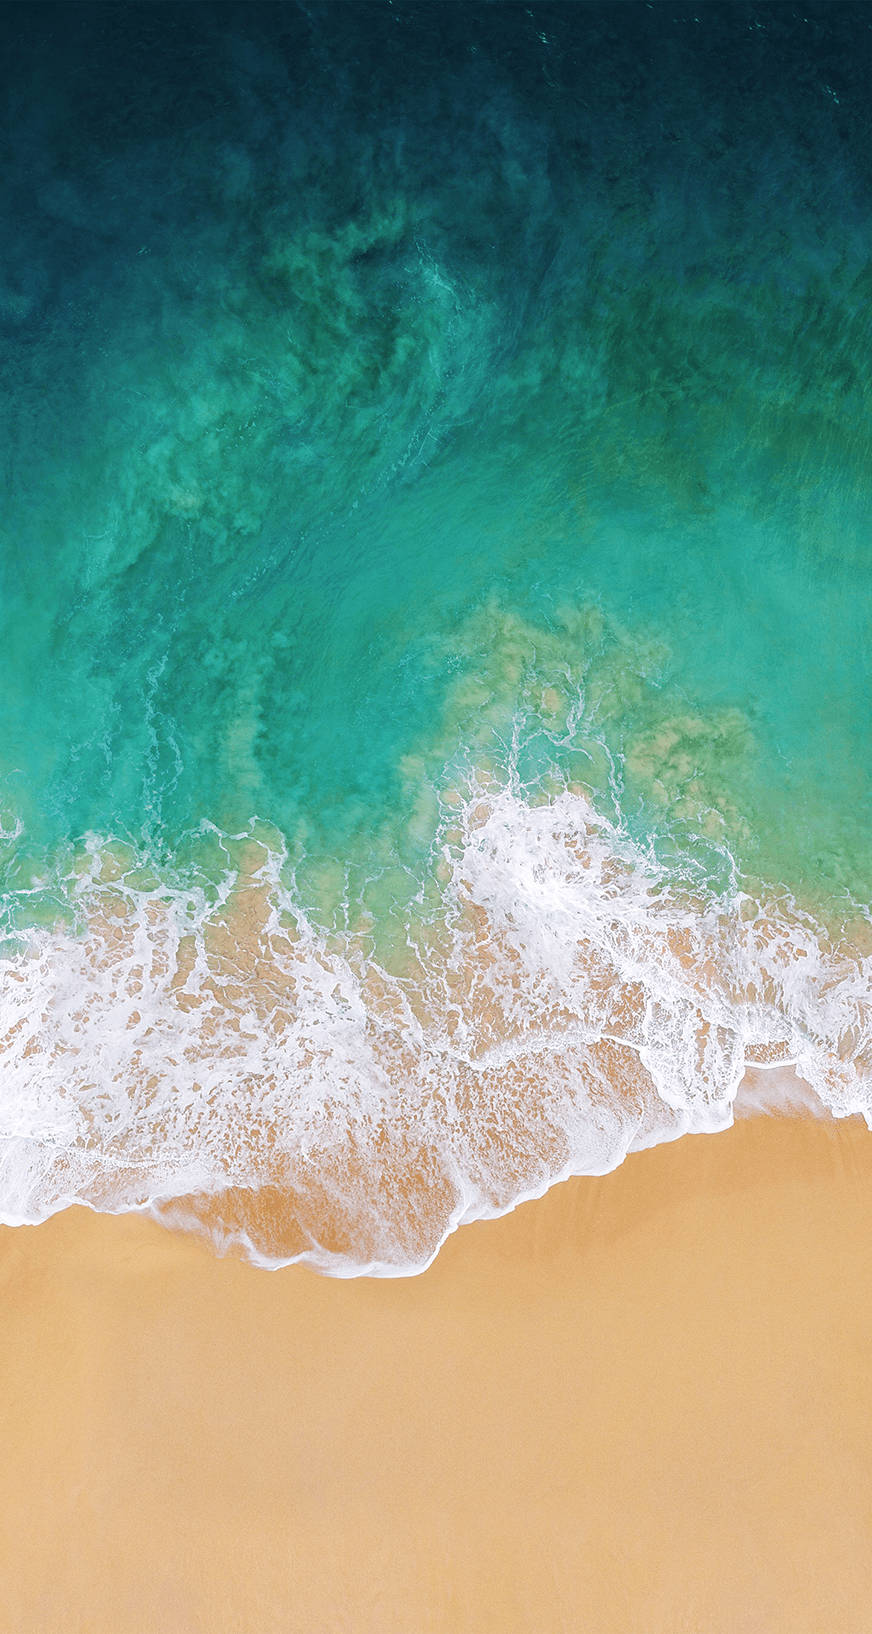 Brighten Up Your Day With A Beachside View Wallpaper